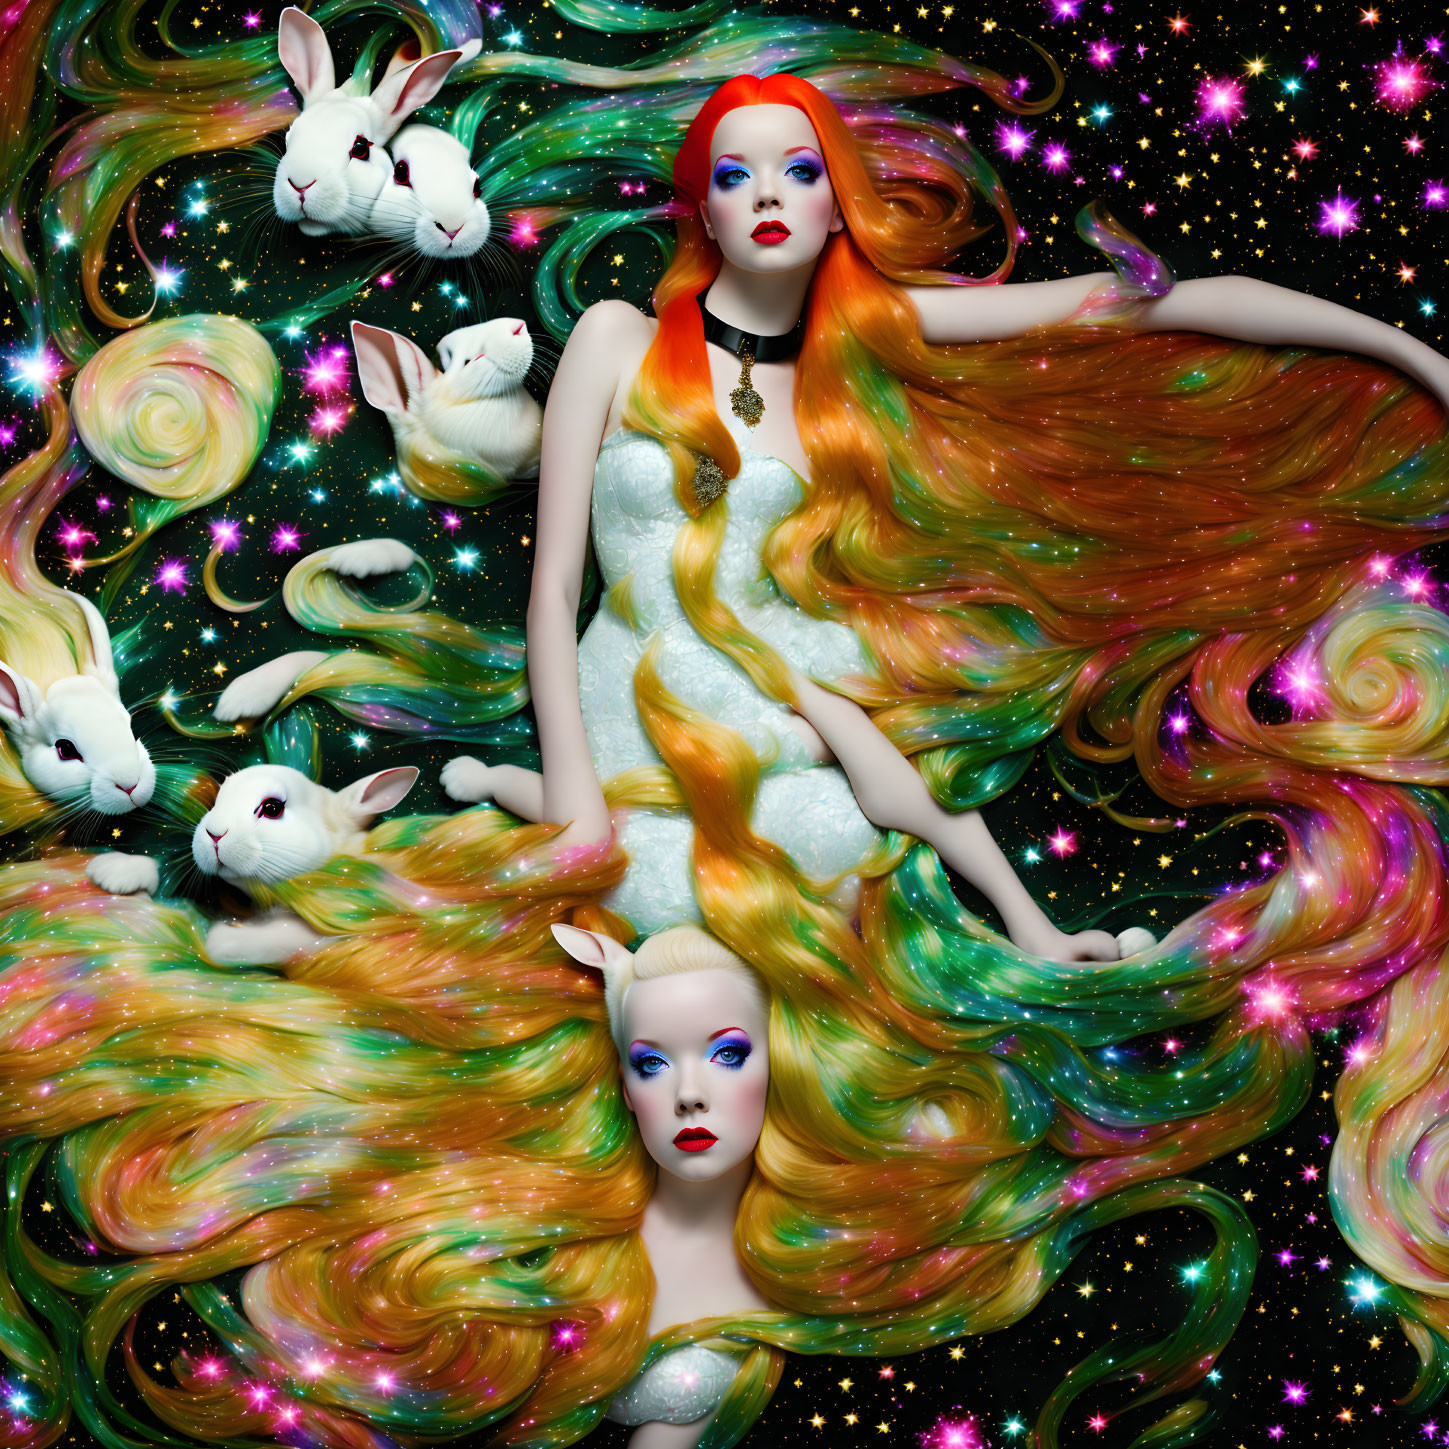 Vibrant flowing hair in surreal cosmic setting